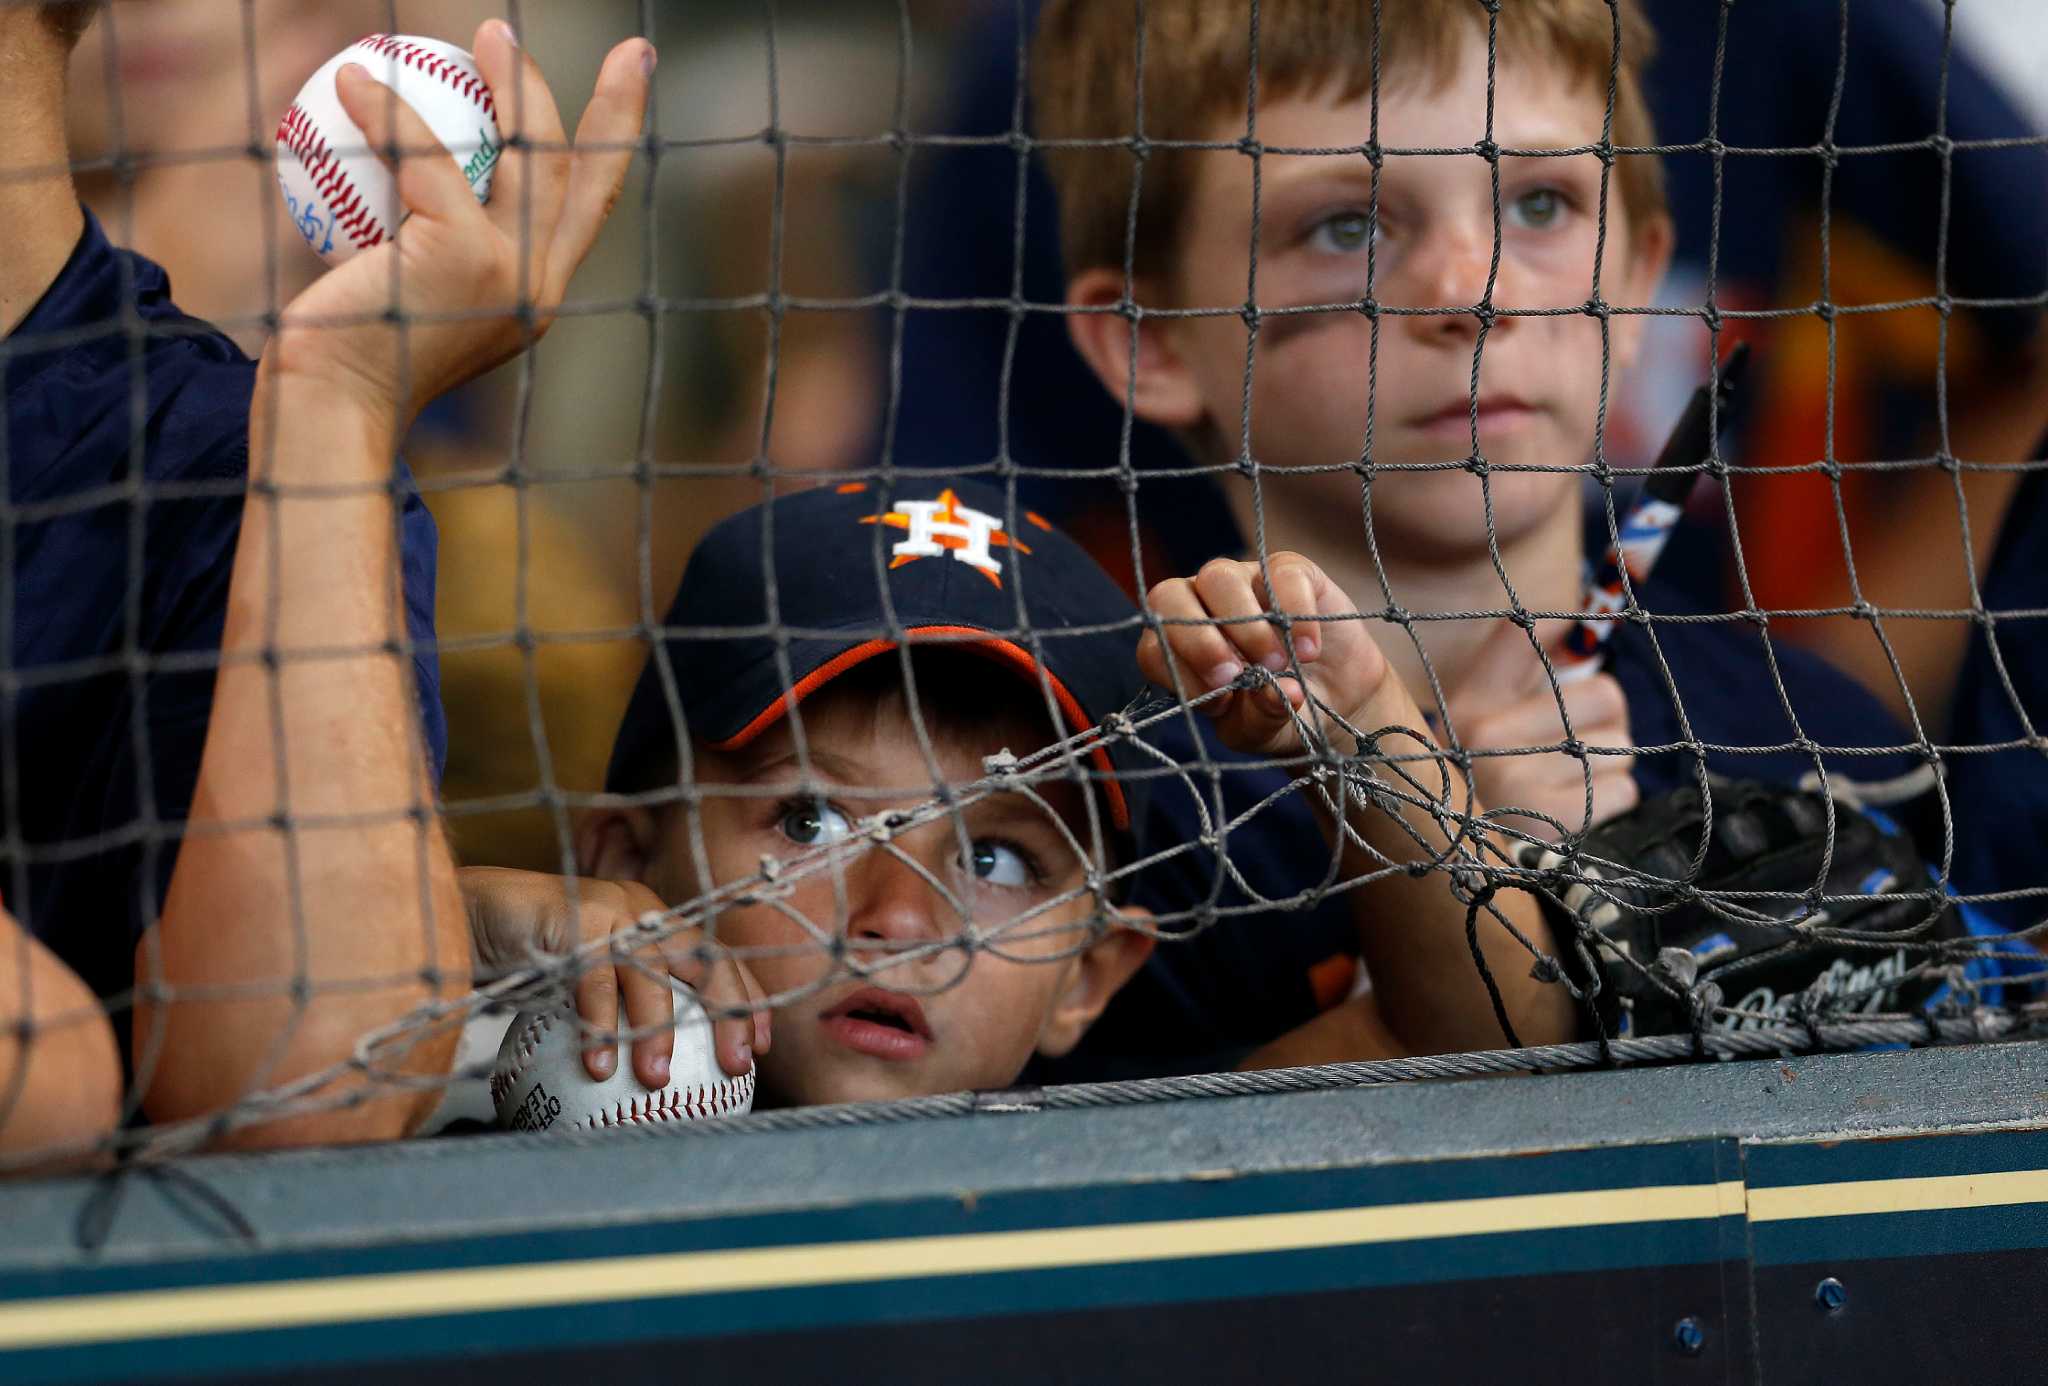 Astros announce extension of netting at Whataburger Field